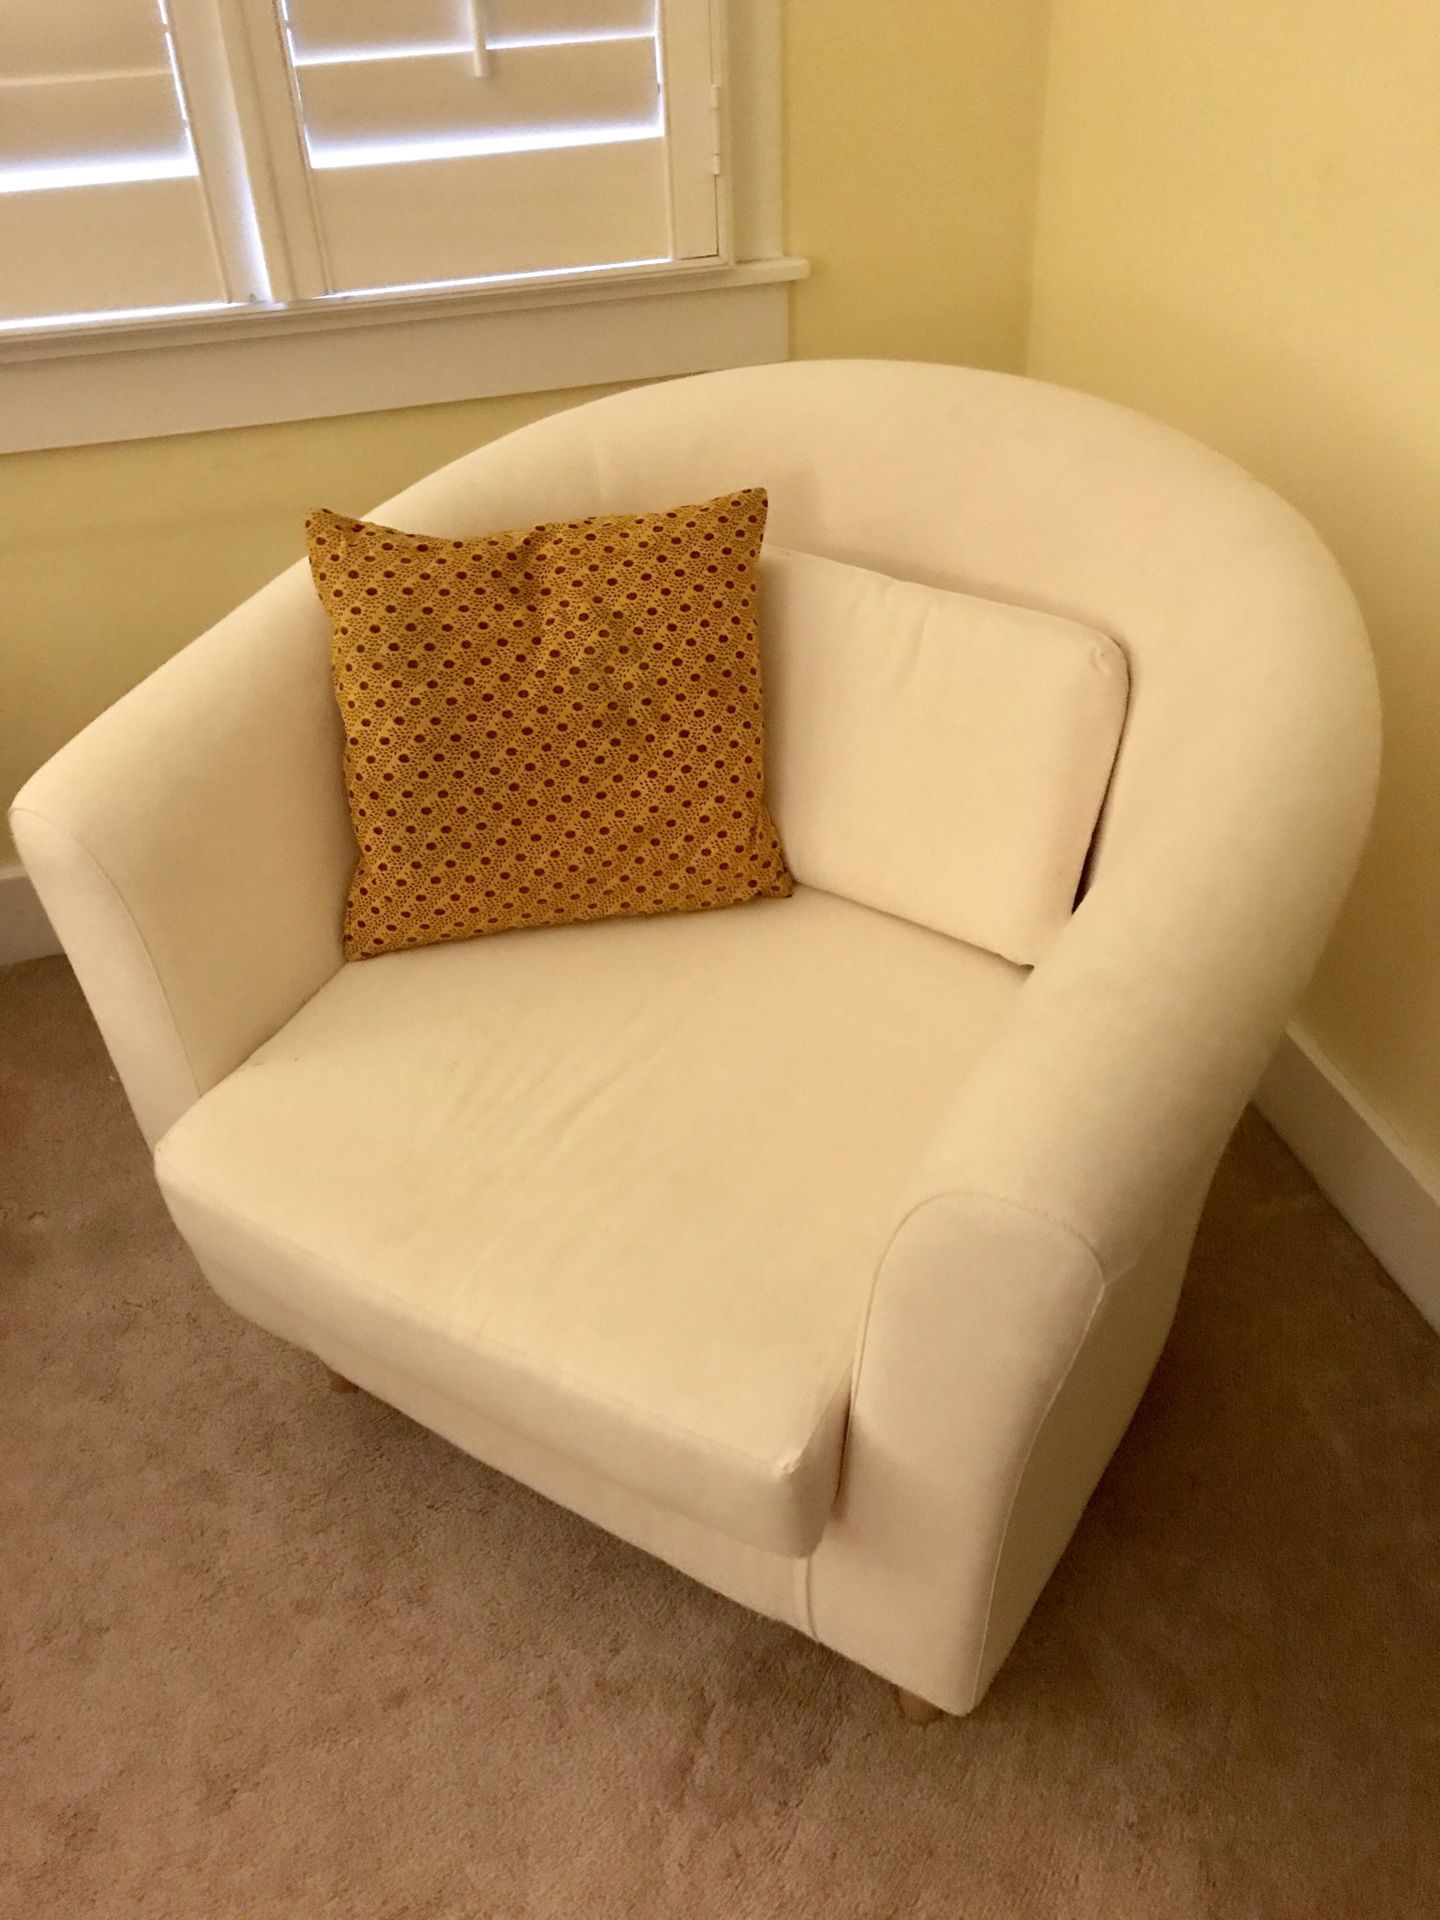 Comfy corner chair. Compact shape. Good fit. 25” deep, 29” tall, 30” wide. Light clean lines.